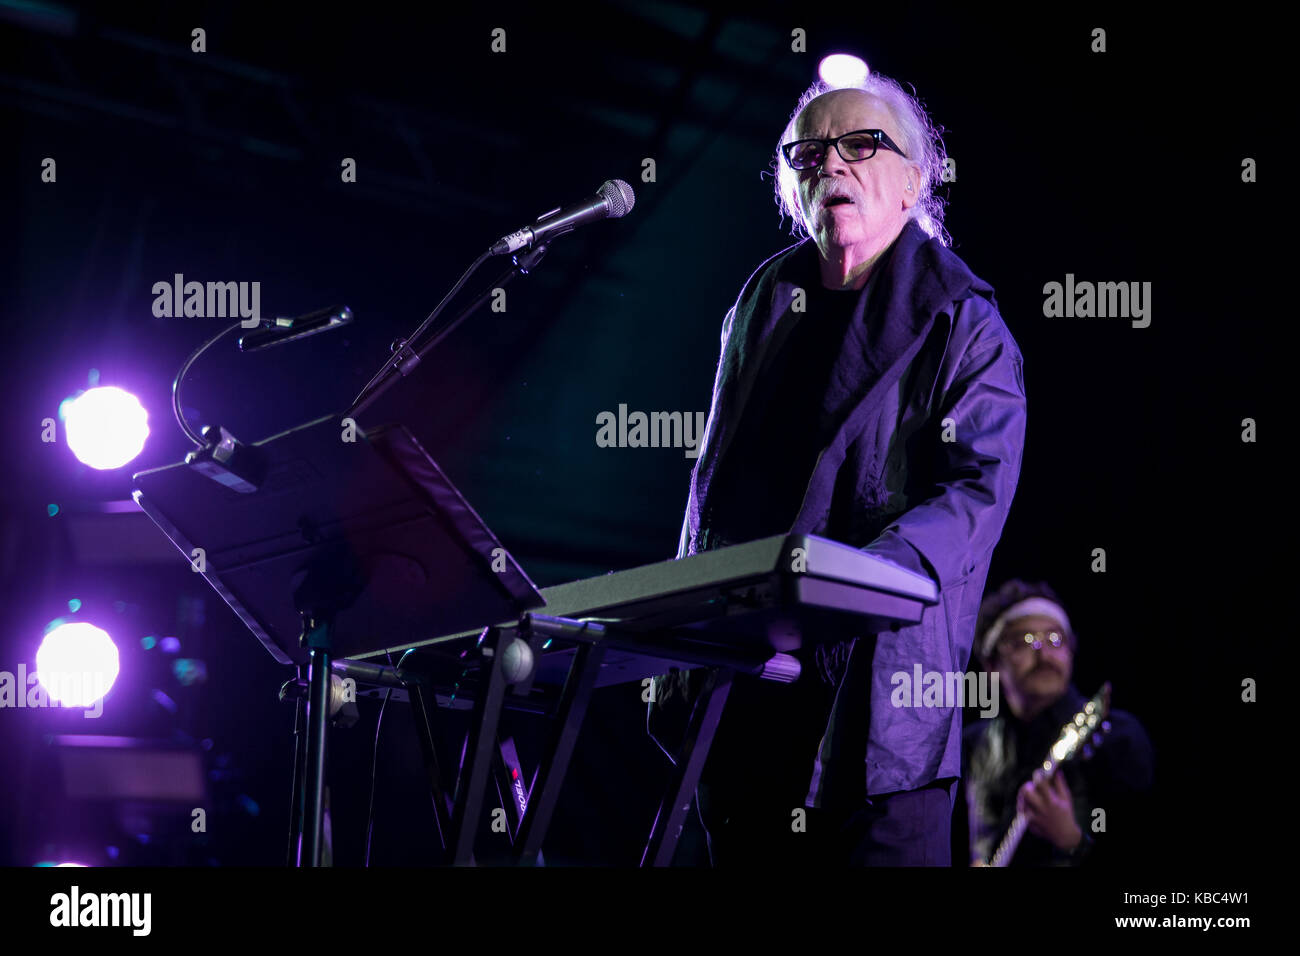 The American musician, screenwriter and film director John Carpenter performs a live concert at the Spanish music festival Primavera Sound 2016 in Barcelona. John Carpenter is commonly known for his horror and science fiction films from the 1970s and 1980s. Spain, 02/06 2016. Stock Photo